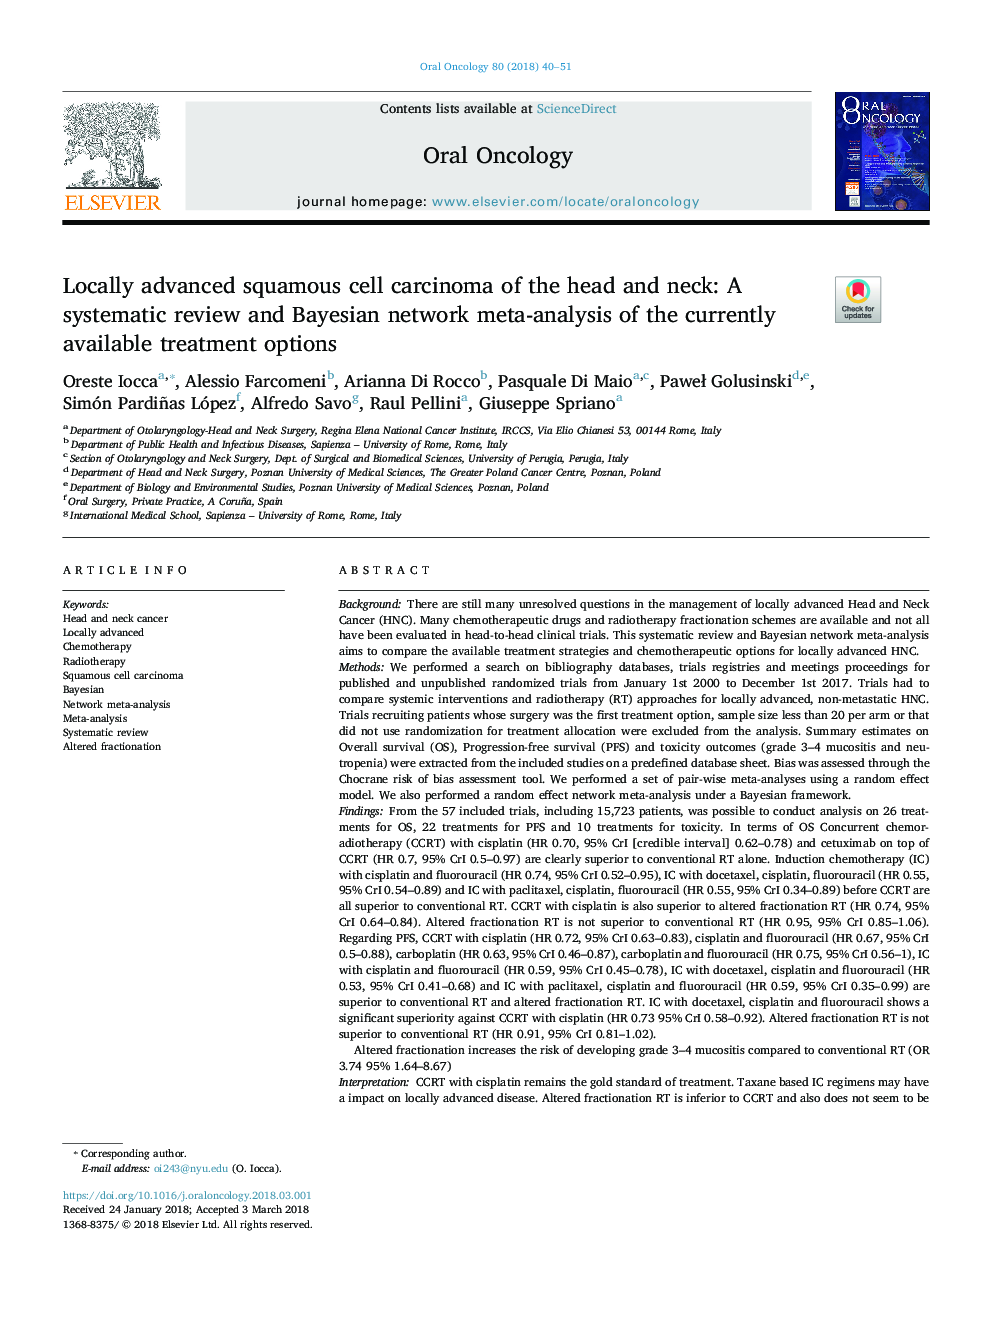 Locally advanced squamous cell carcinoma of the head and neck: A systematic review and Bayesian network meta-analysis of the currently available treatment options